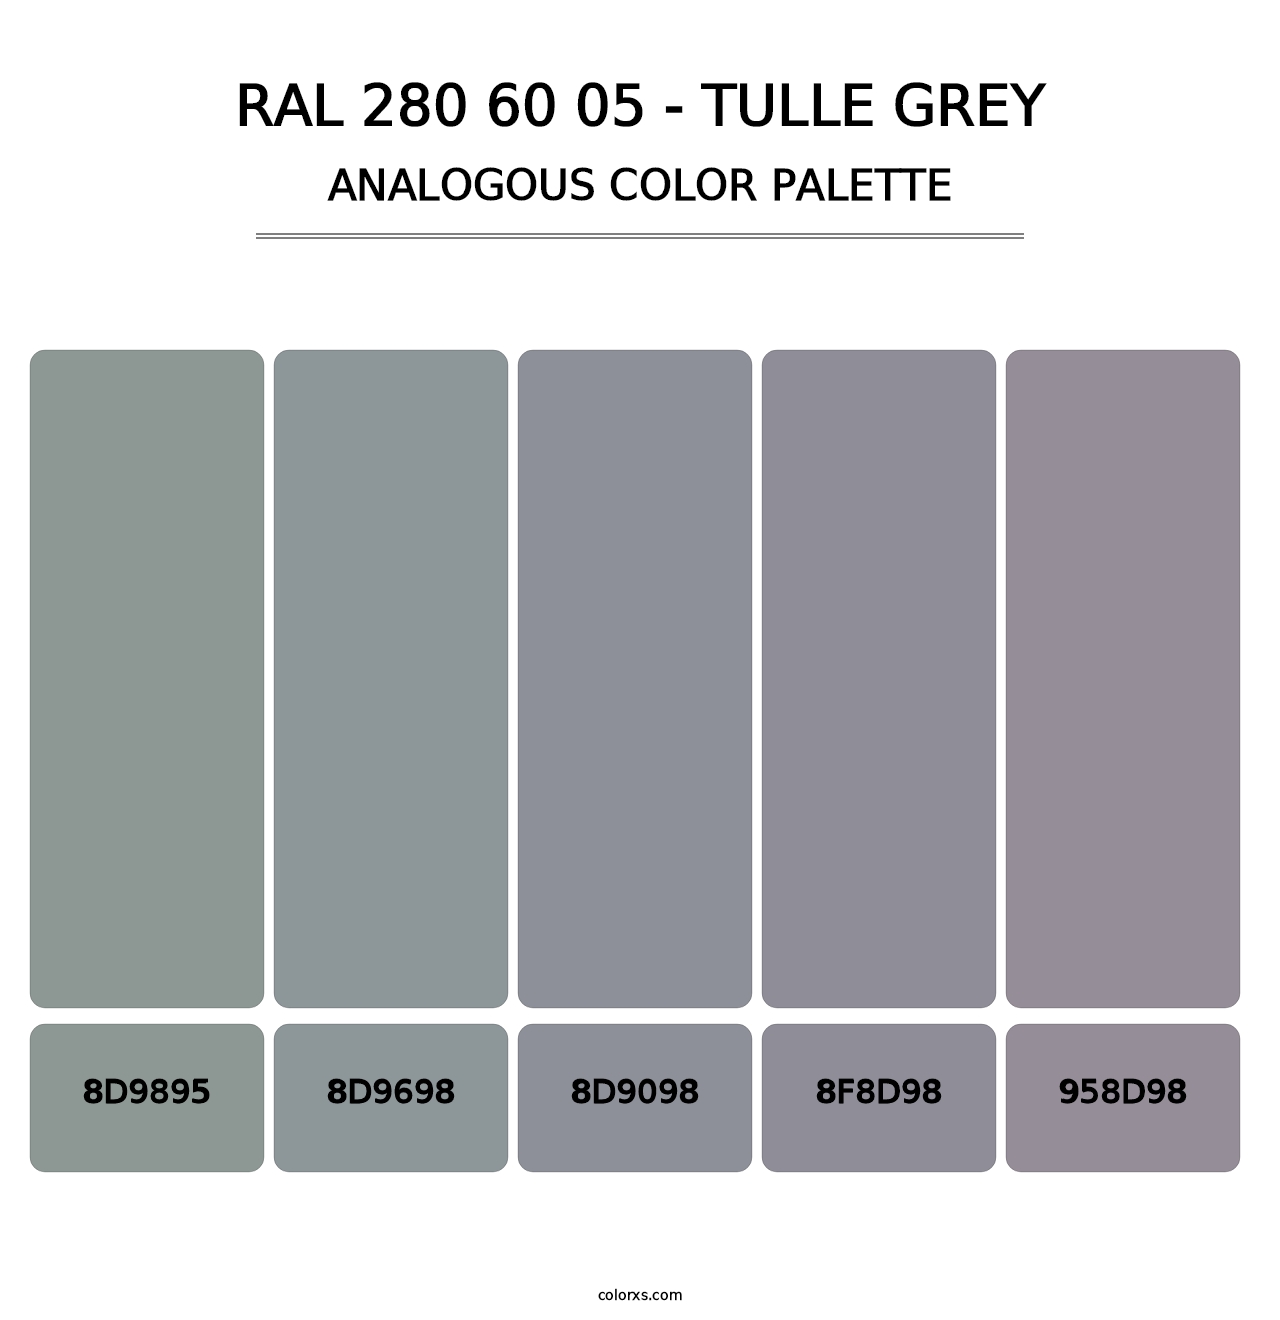 RAL 280 60 05 - Tulle Grey - Analogous Color Palette